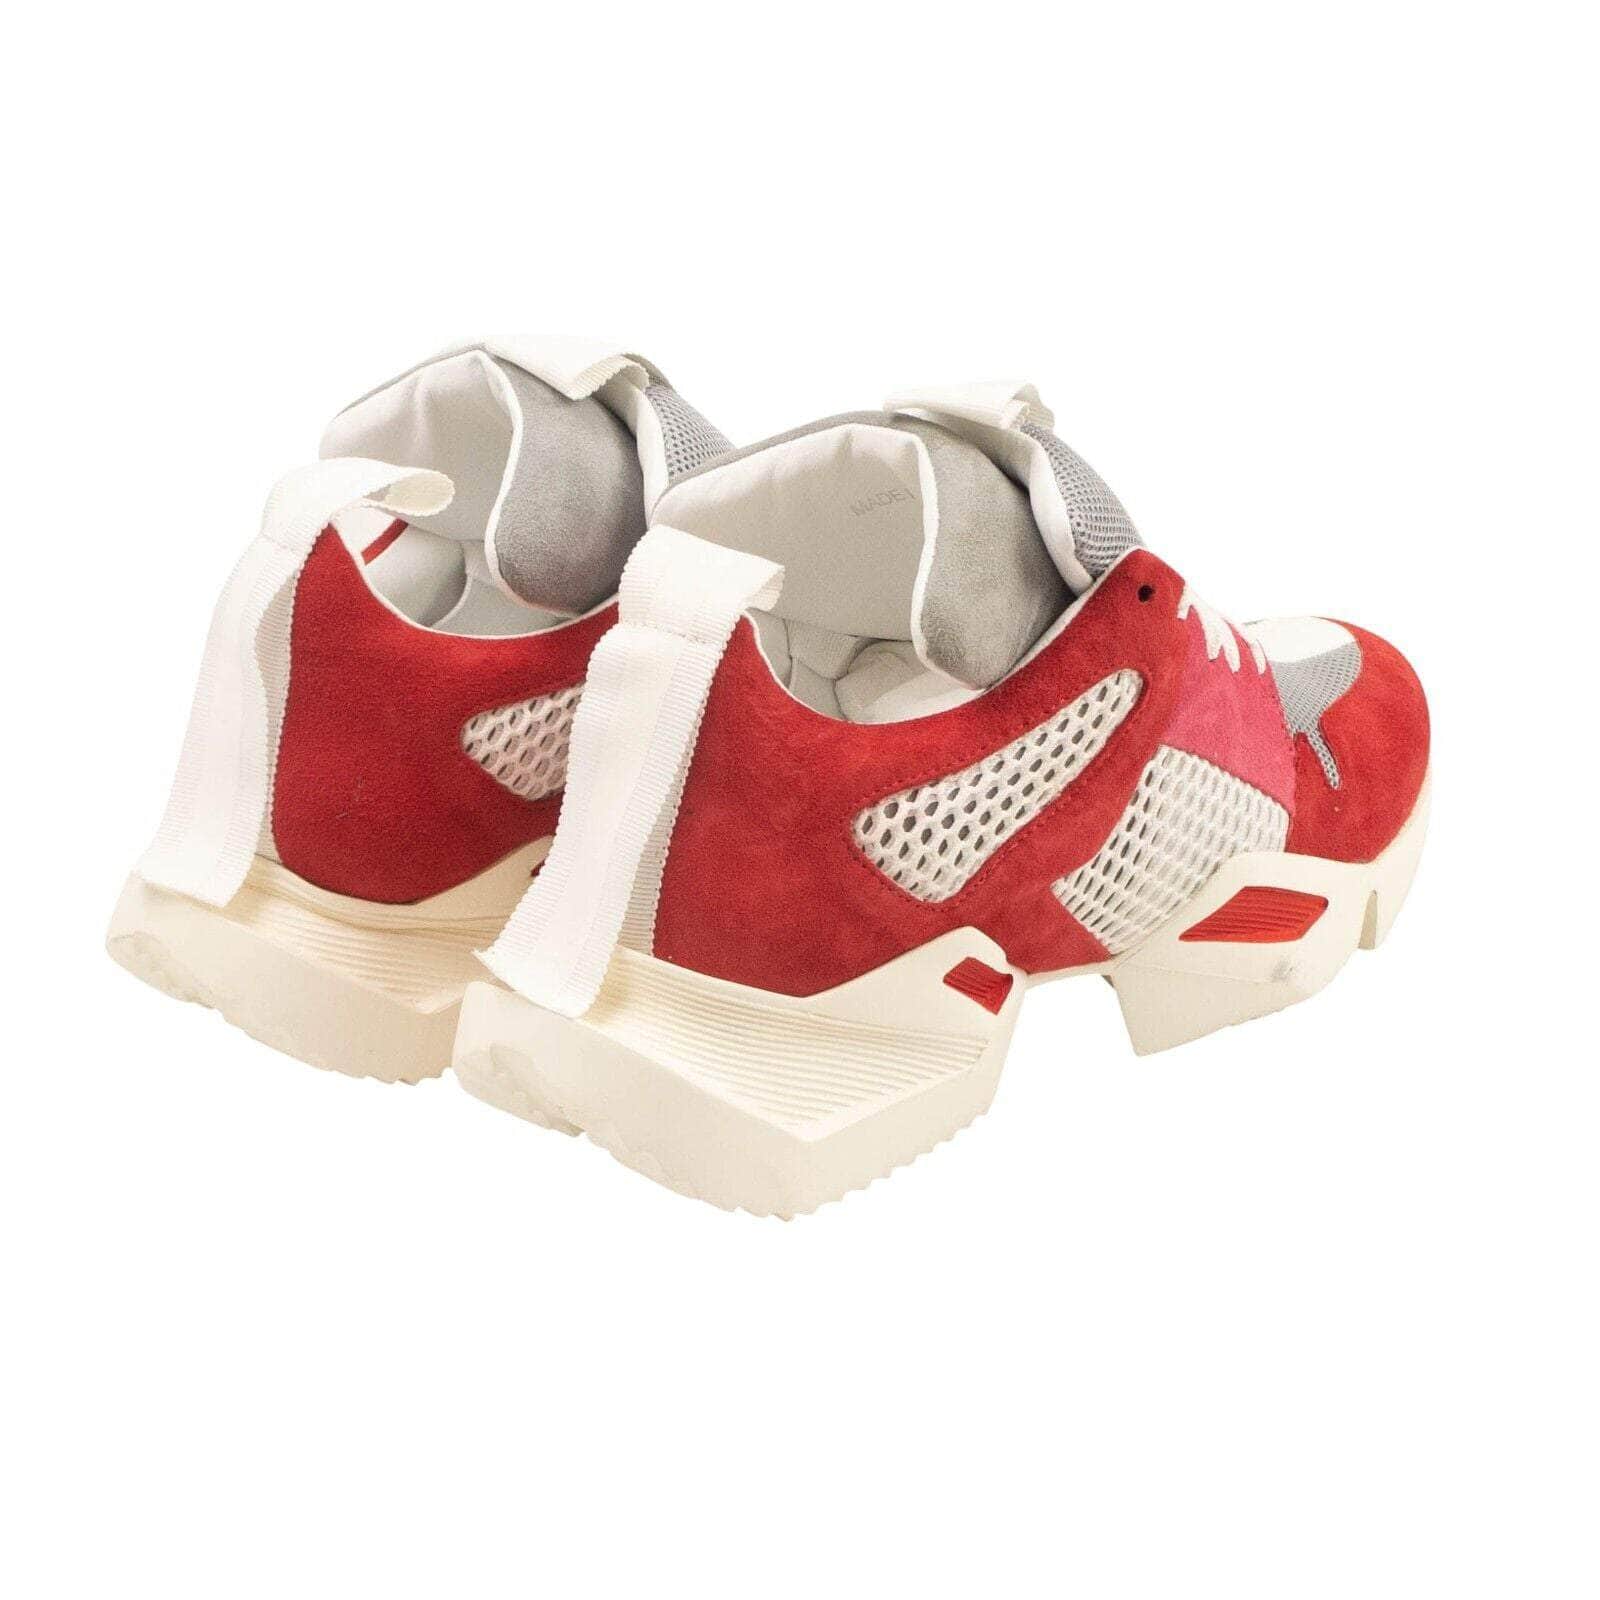 Unravel Project couponcollection, gender-womens, main-shoes, size-39, uncategorized, under-250, unravel-project 39 / JF6-UN-2004/39 Red, Pink And Grey Mesh Suede Sneakers JF6-UN-2004/39 JF6-UN-2004/39